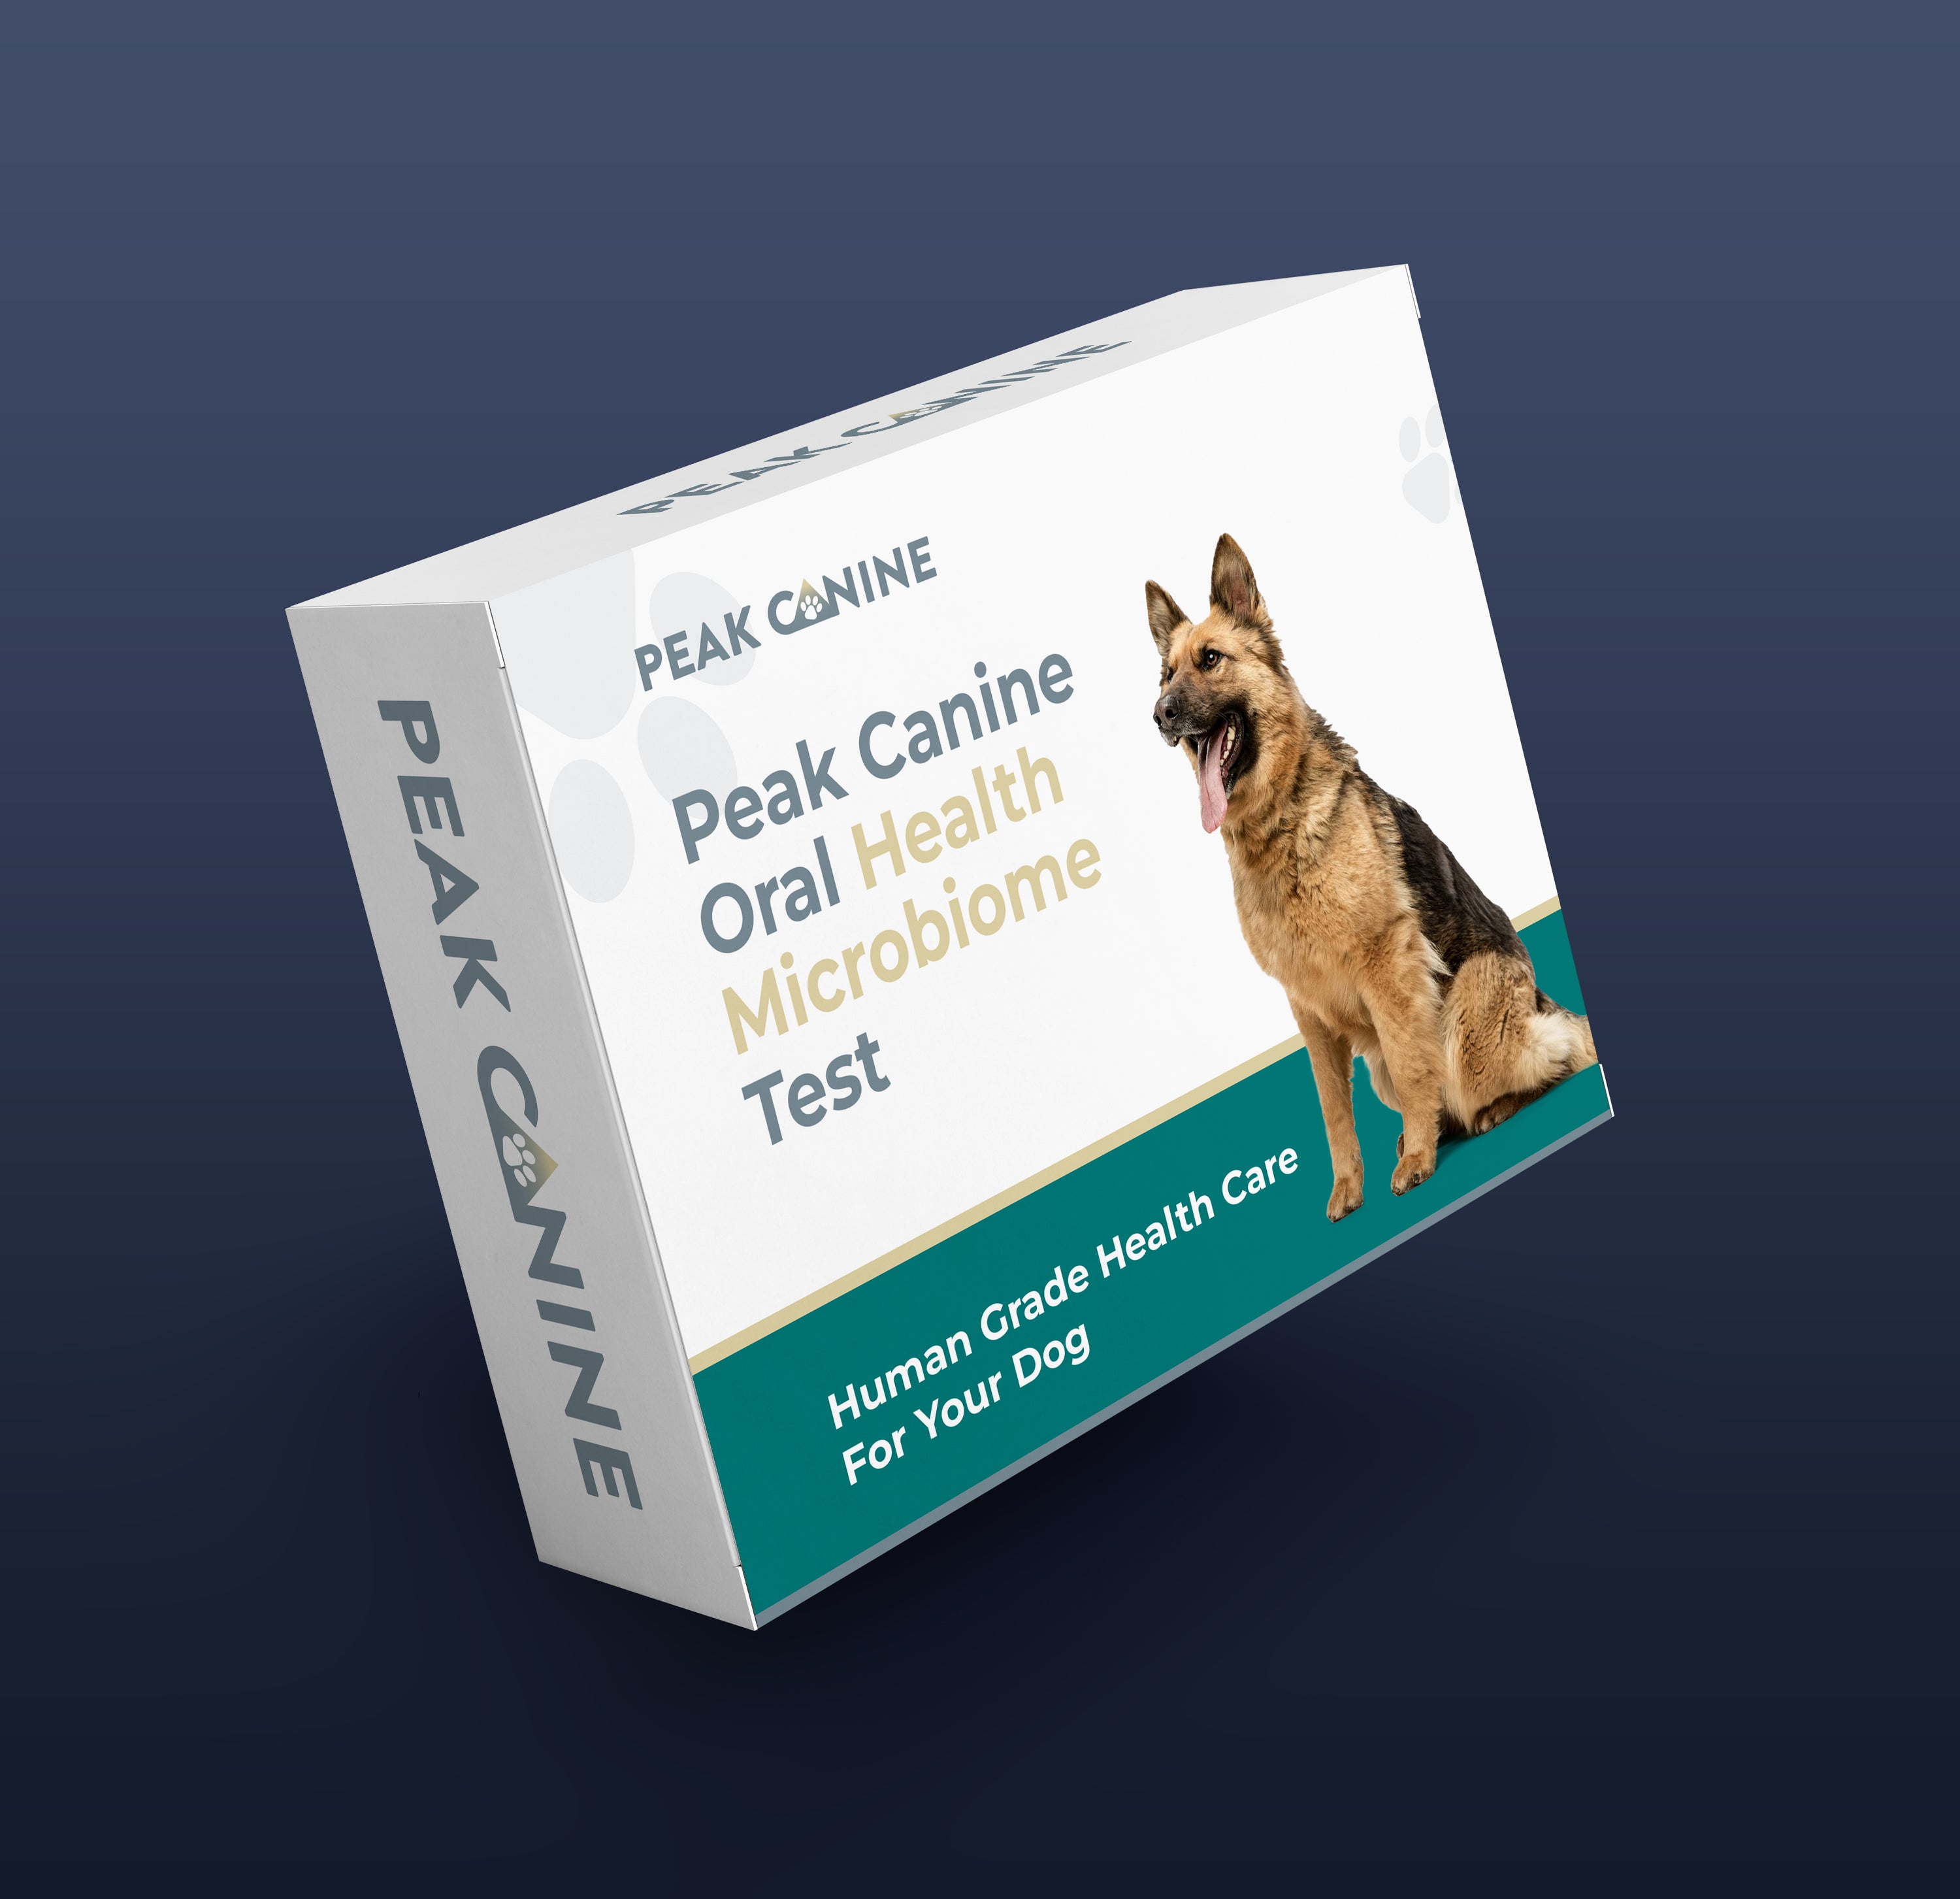 PeakCanine Welness health microbiome test for dogs